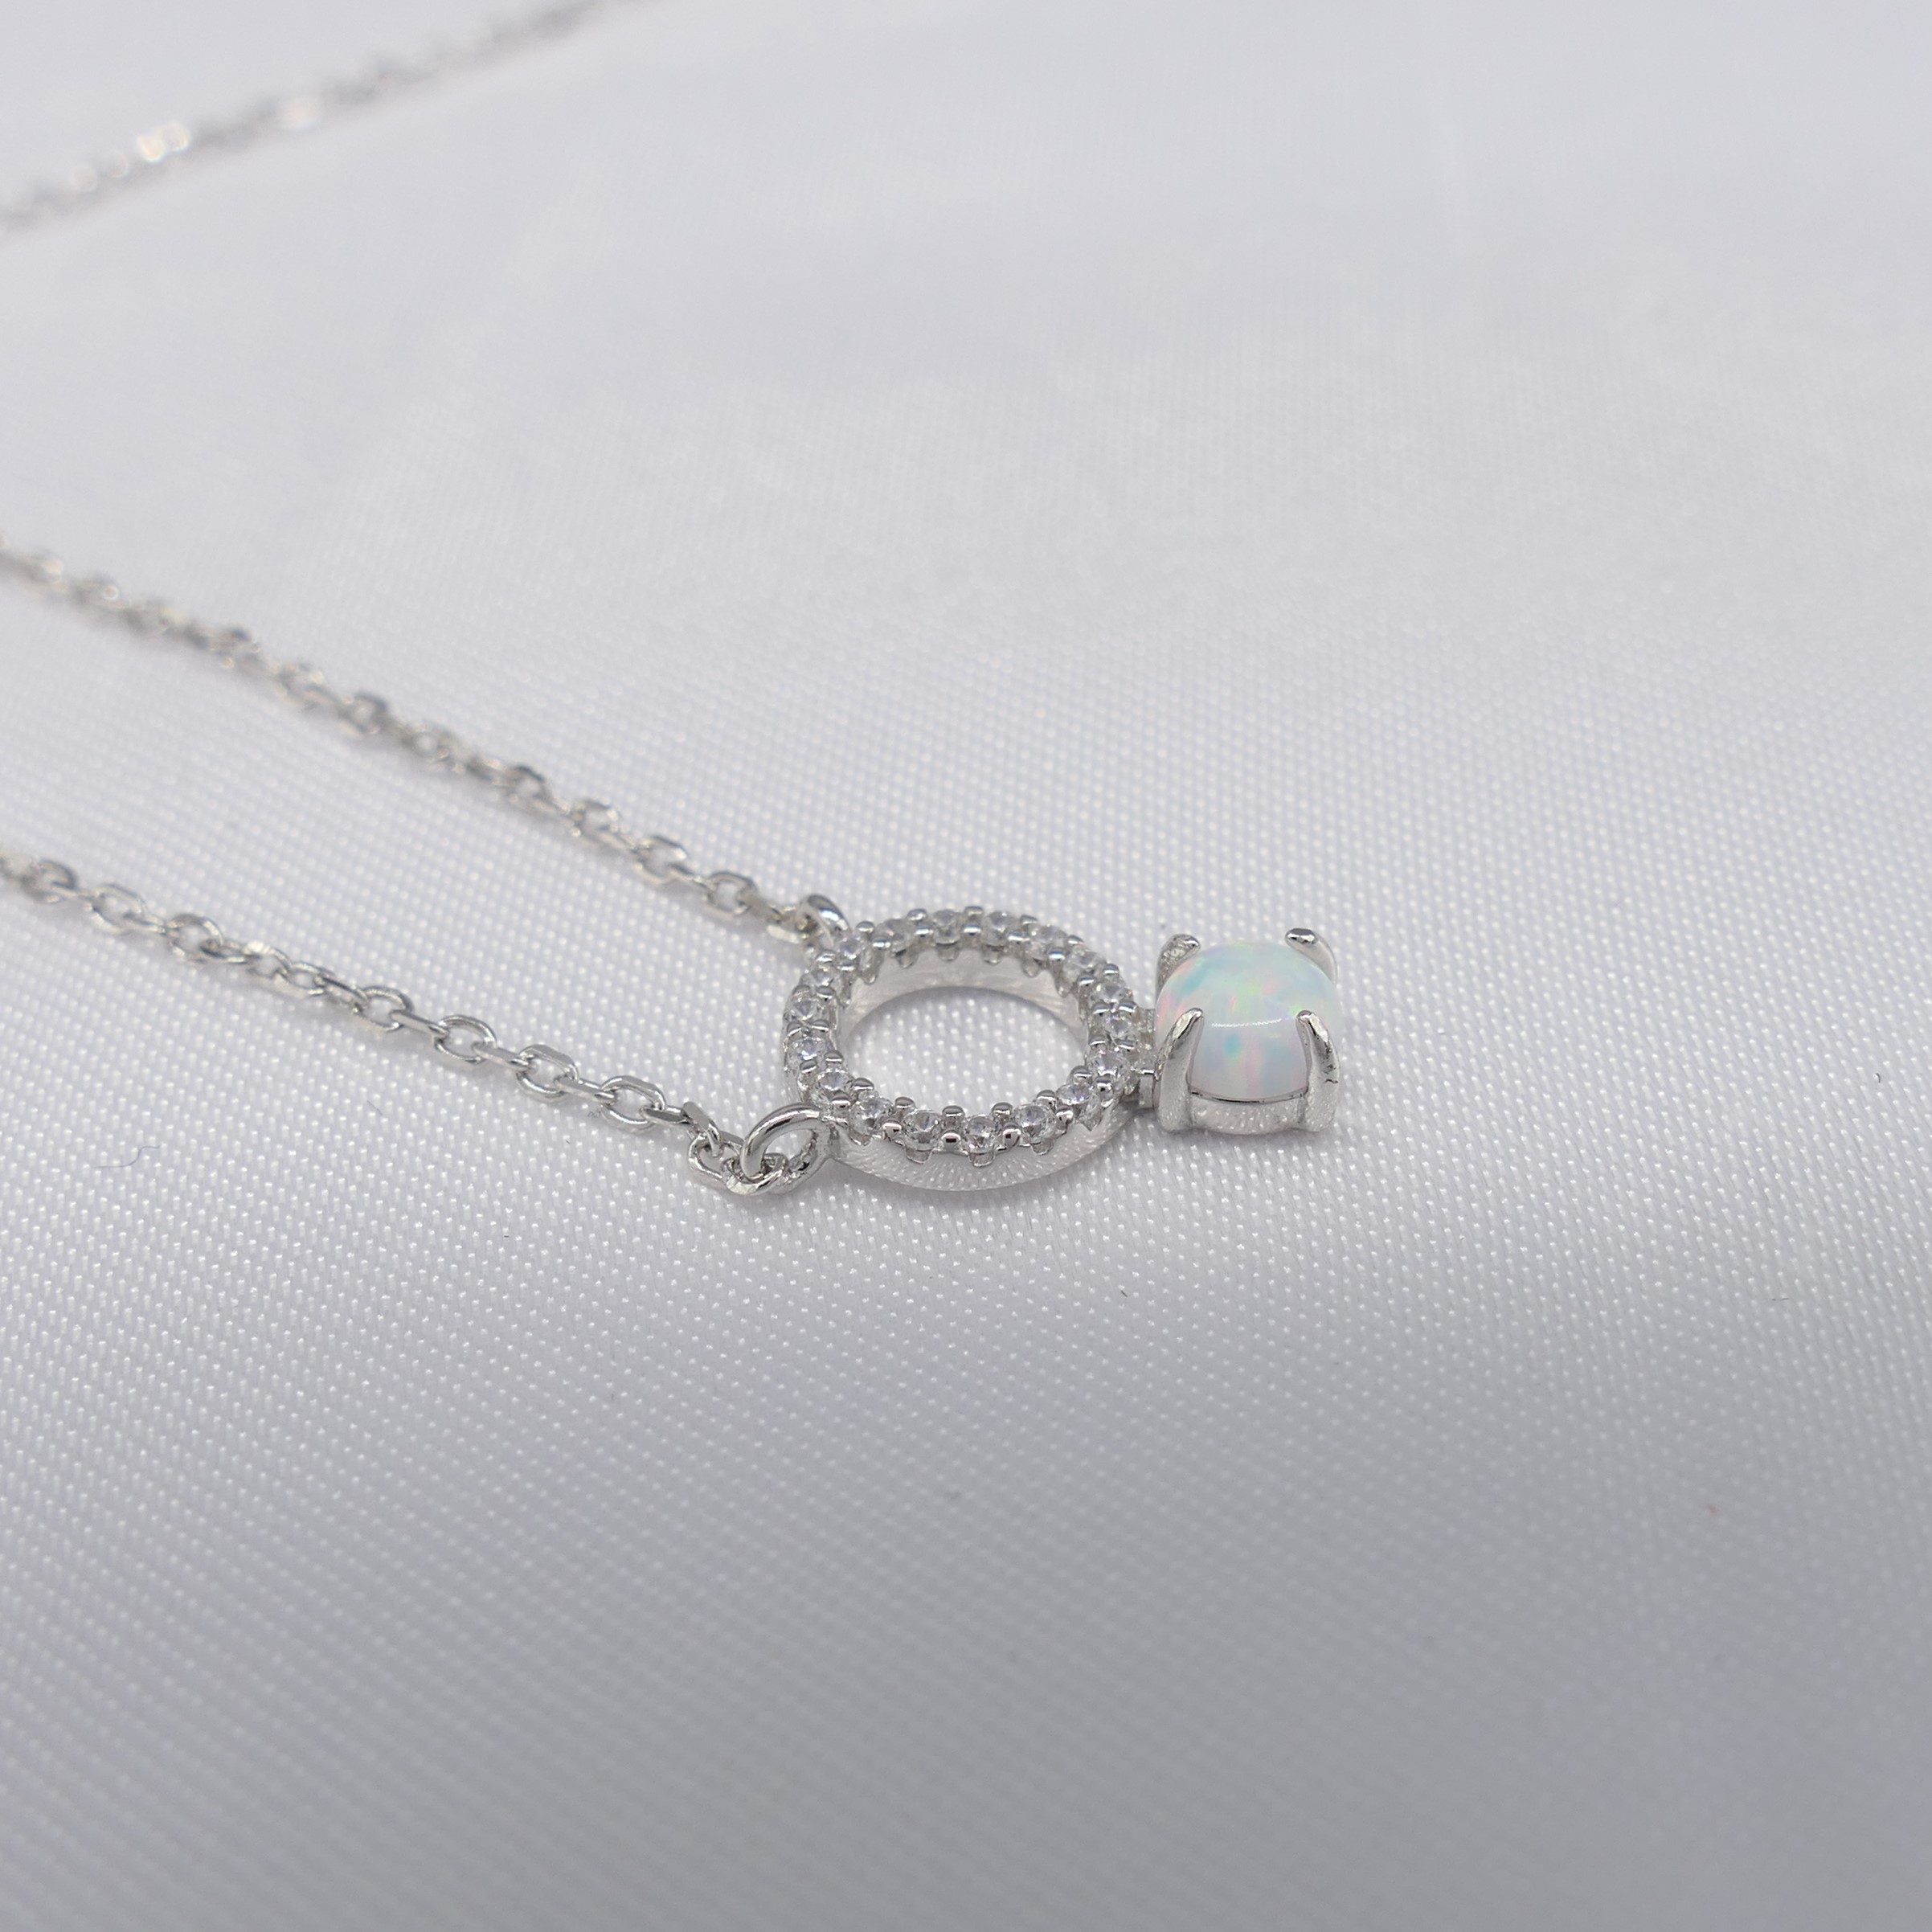 Cabochon Opalite Gemstone and White Cubic Zirconia Halo Silver Necklace - Image 4 of 6